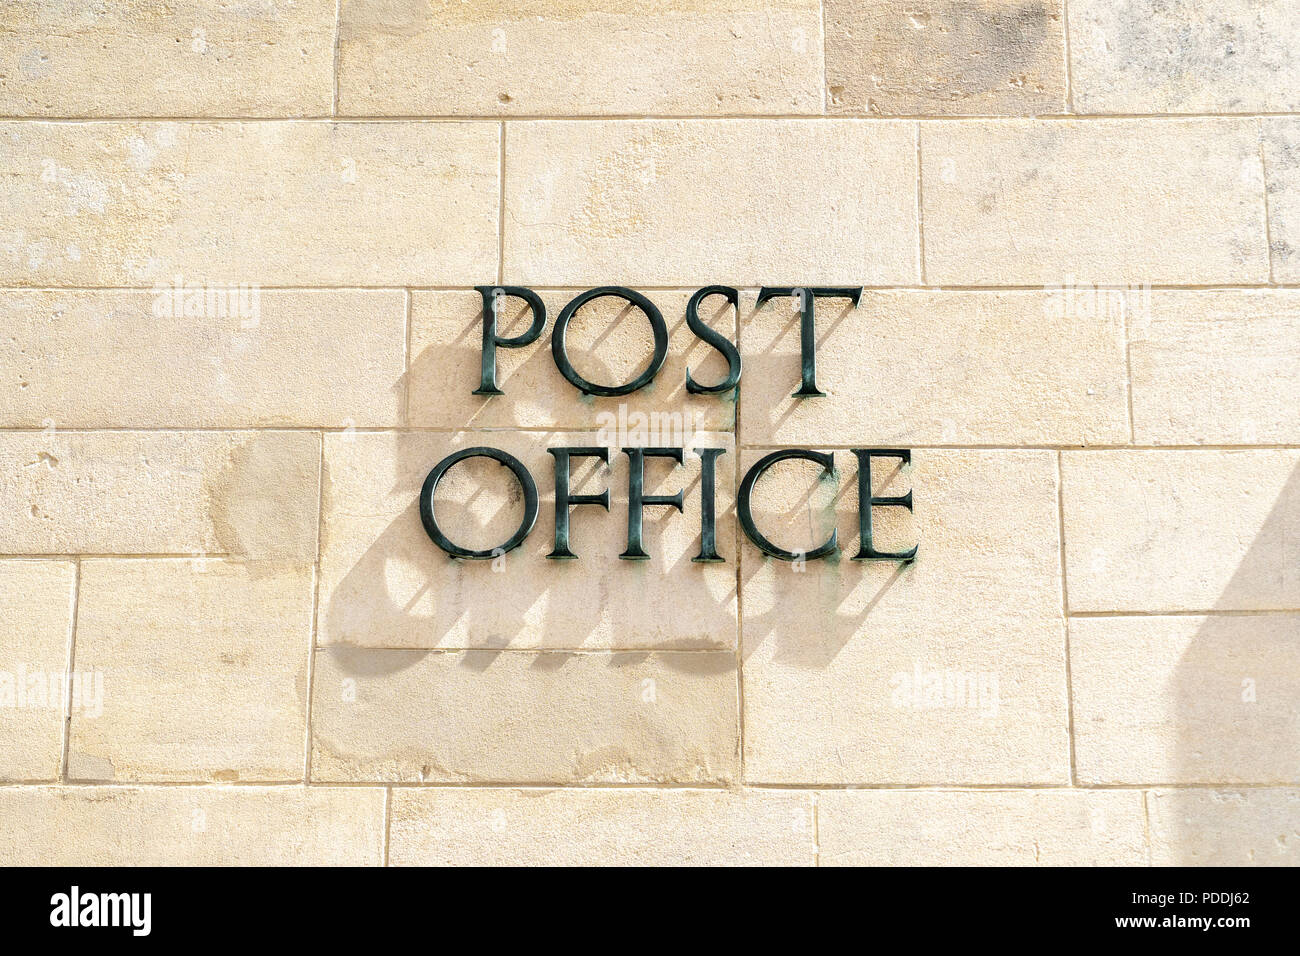 Post Office sign on stone wall Stock Photo